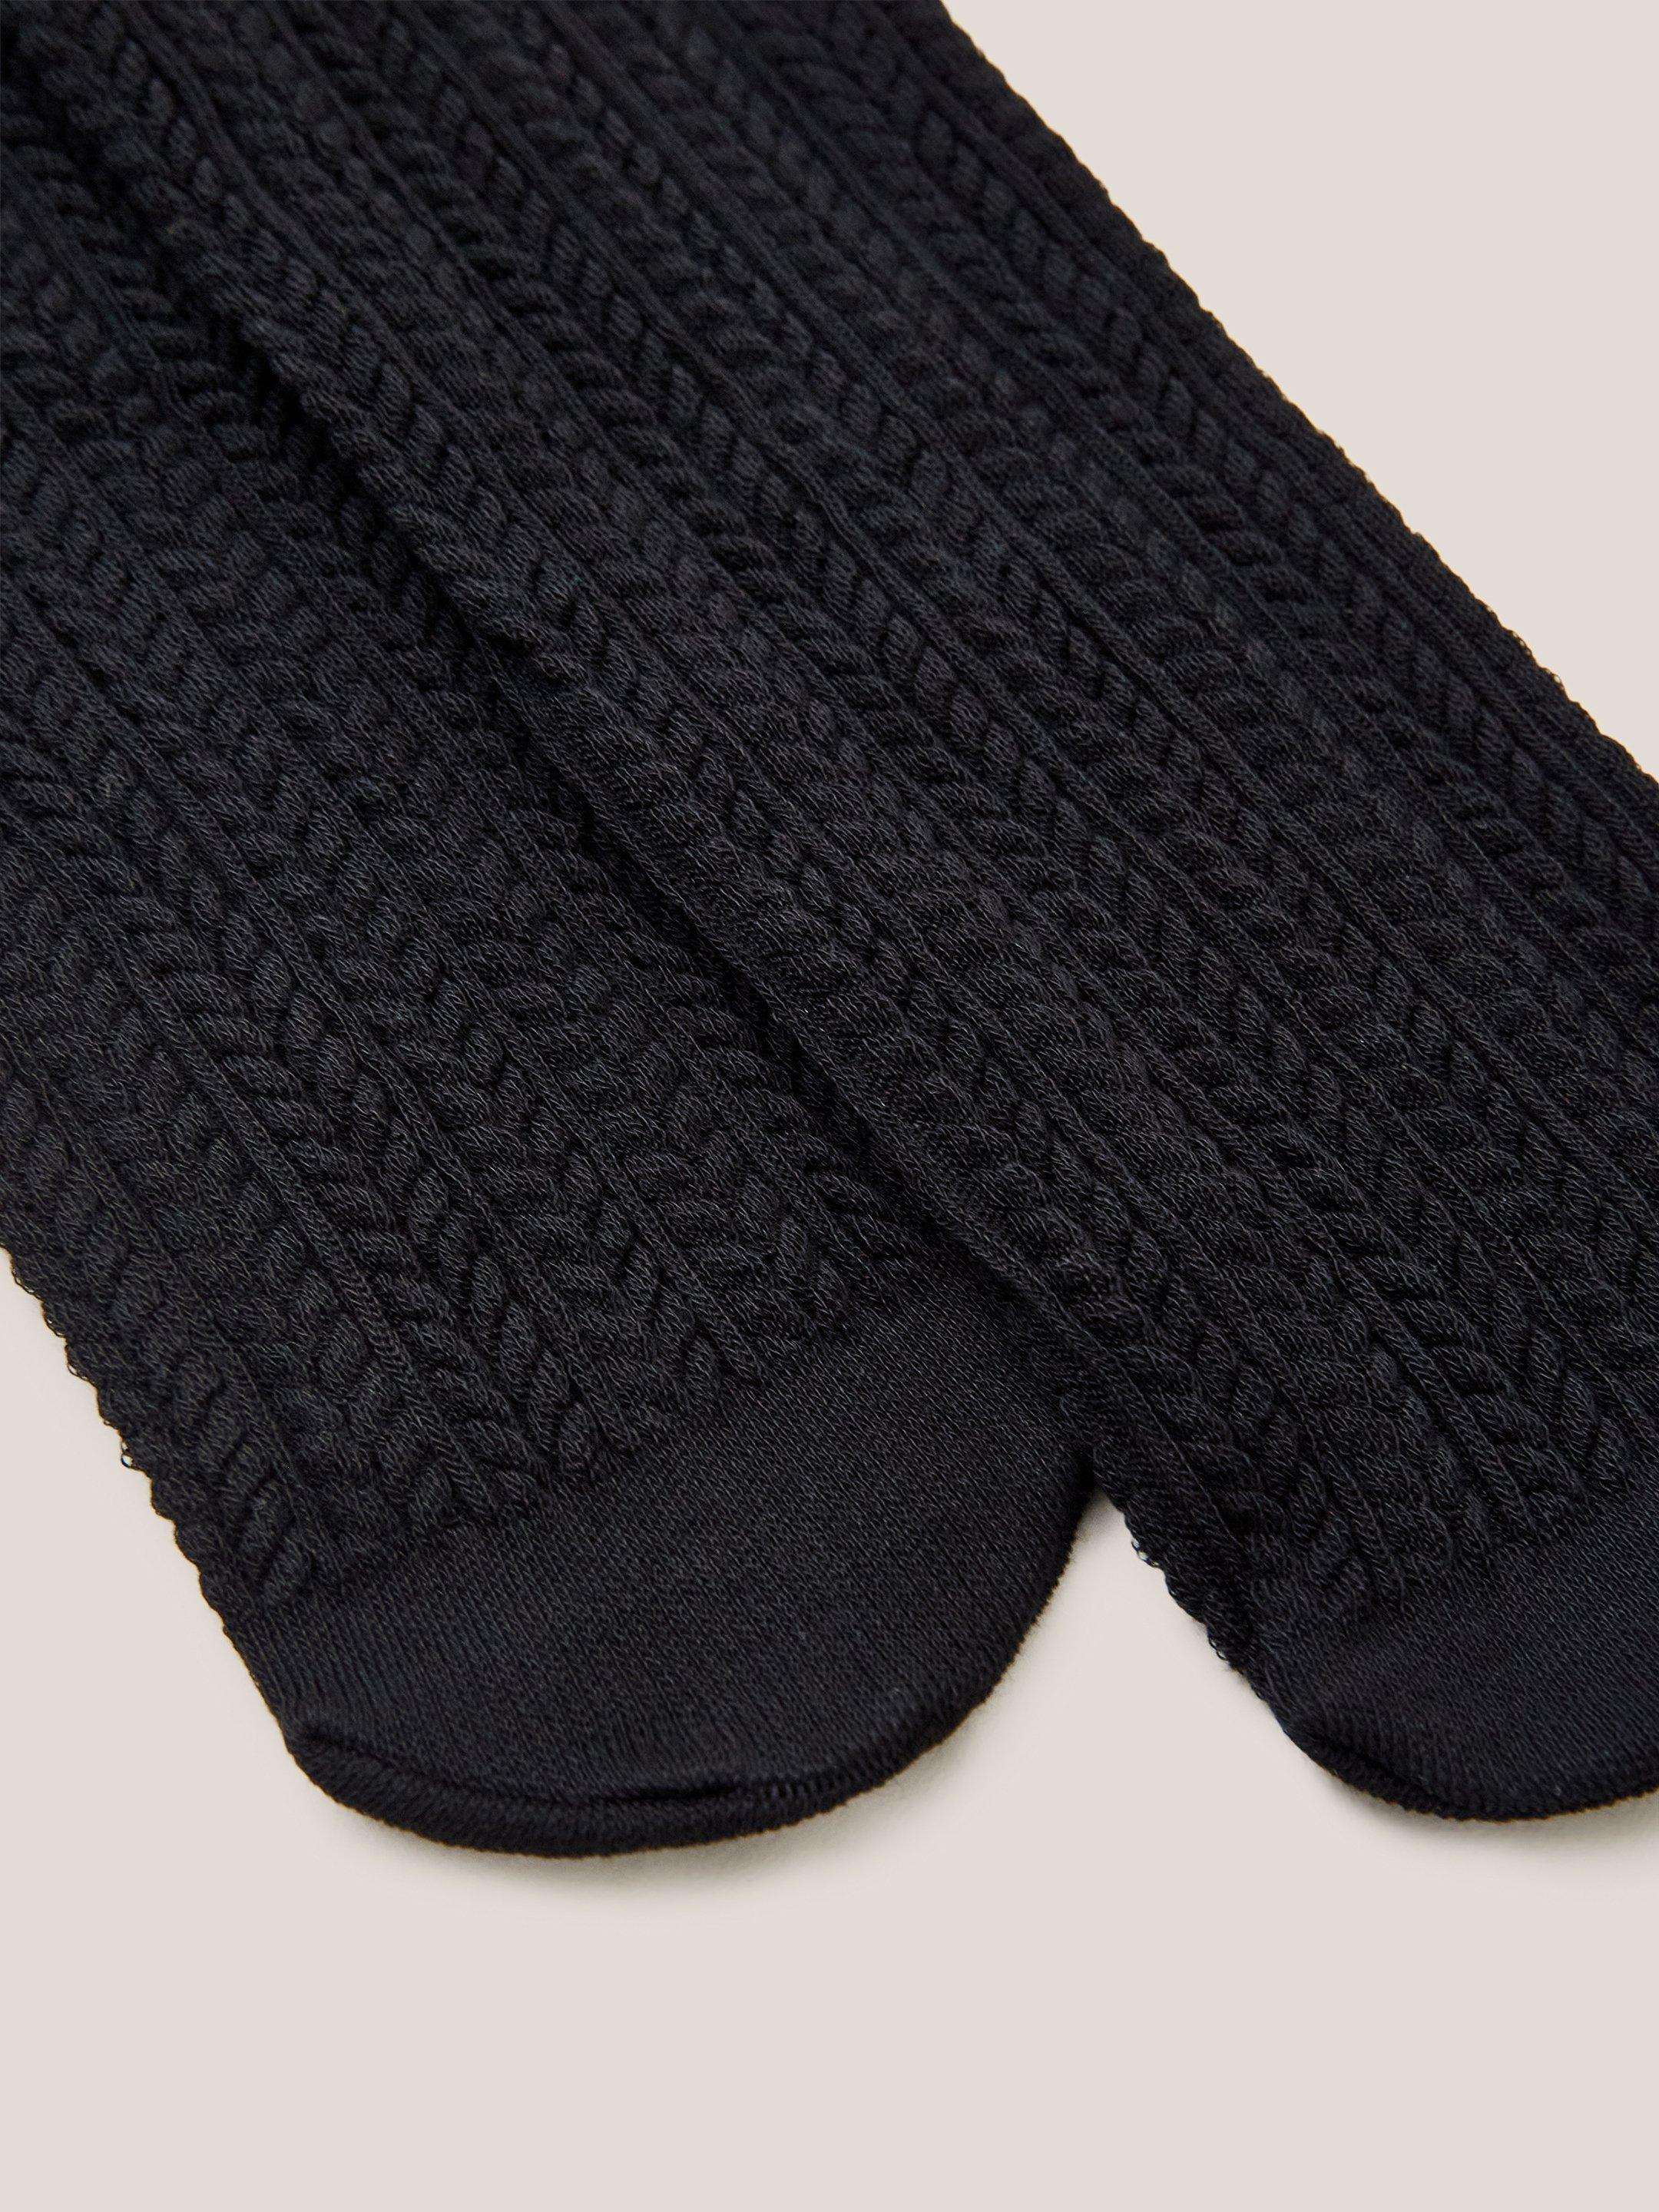 Cara Cable Knit Tights in PURE BLK - FLAT DETAIL